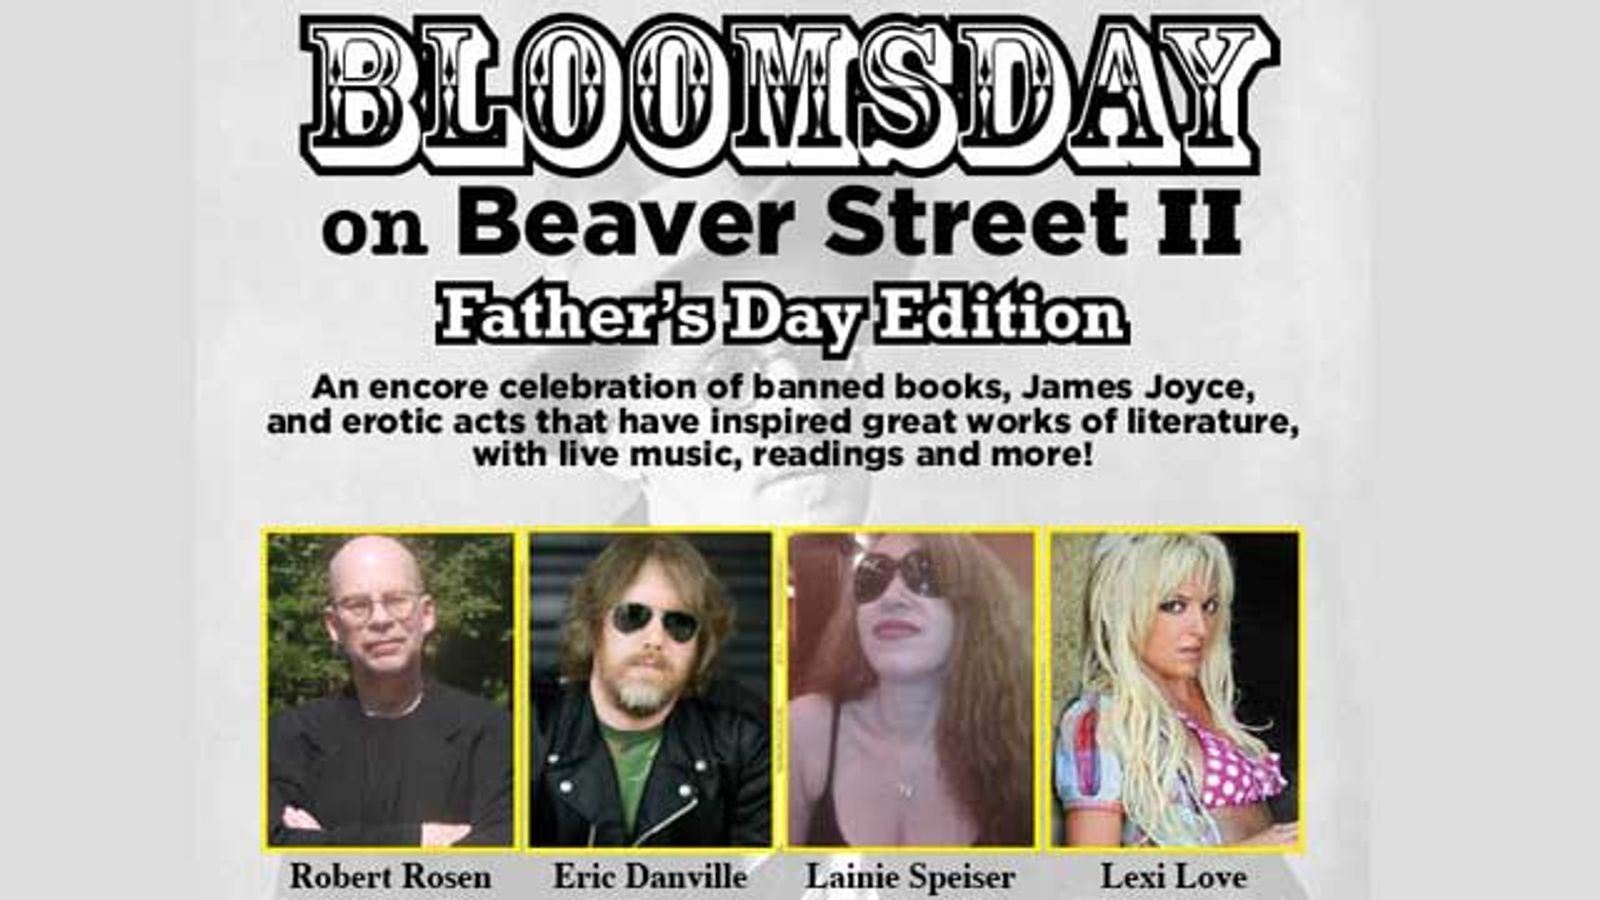 'Bloomsday at Beaver Street II' Father’s Day Event Sunday in NY